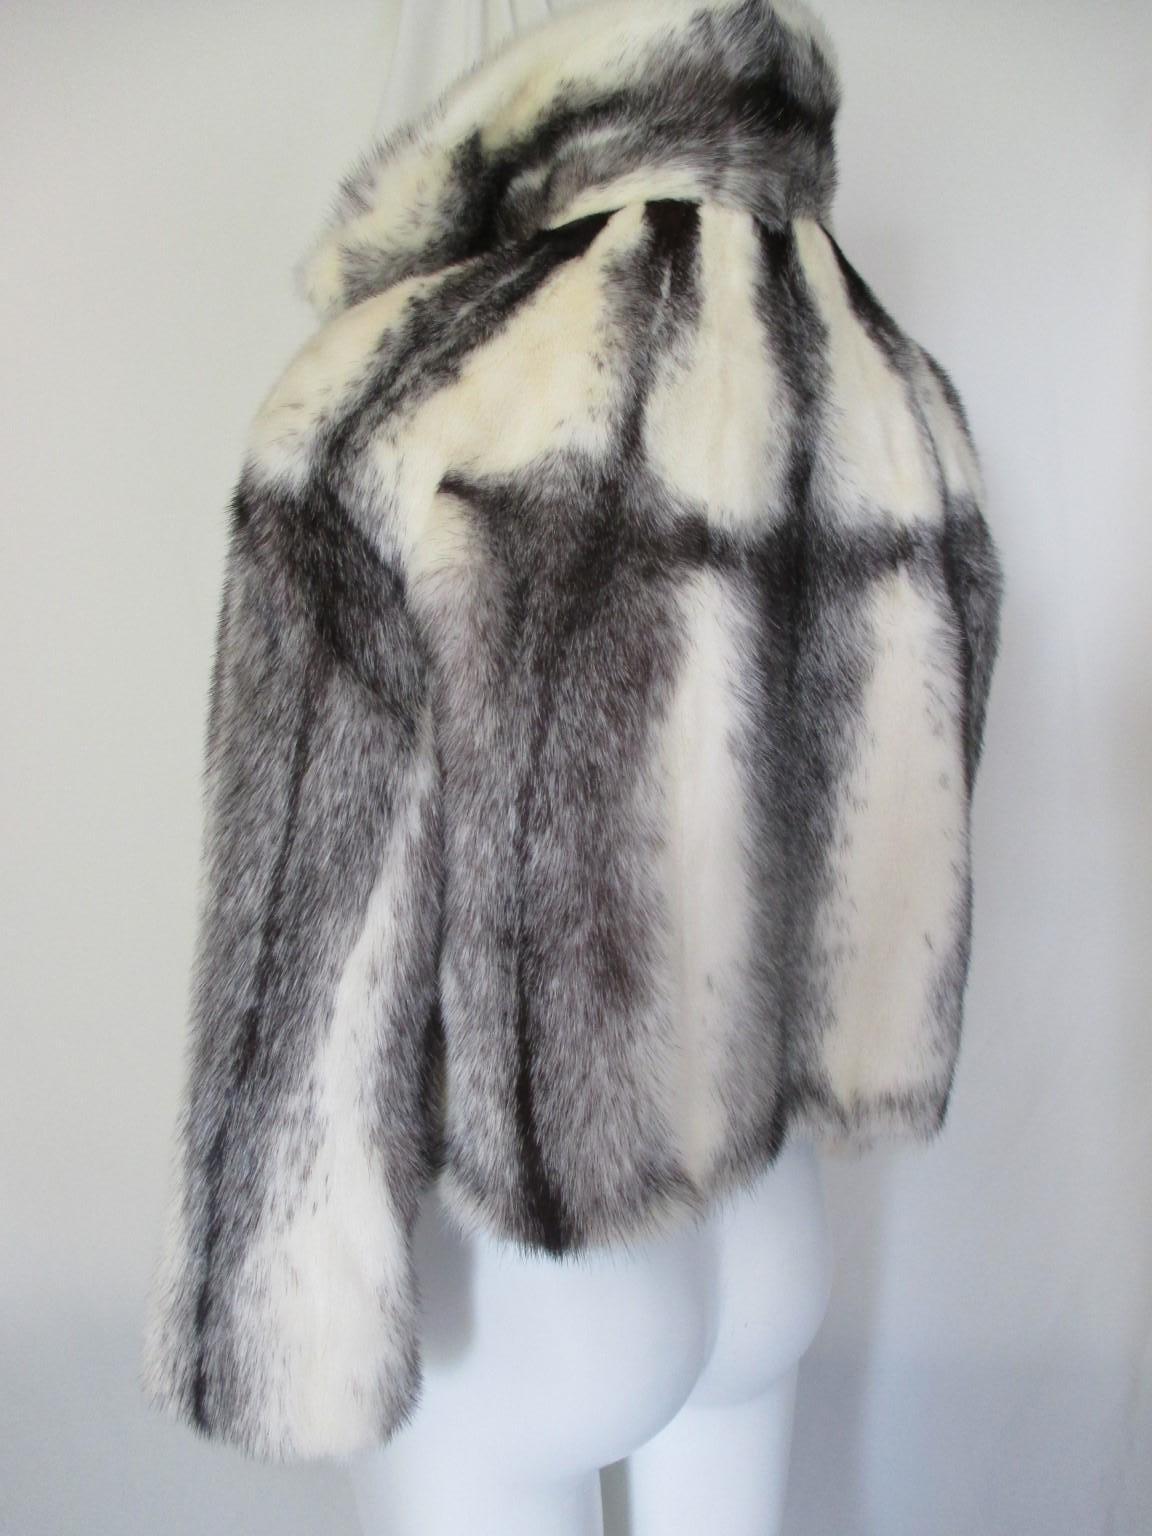 This vintage jacket/bolero look is made of rare soft kohinoor/cross mink fur with a beautiful black/silver striped lining which can be worn reversible.

Look at our storefront for more Kohinoor mink coats and other vintage fur items.

Details:
With